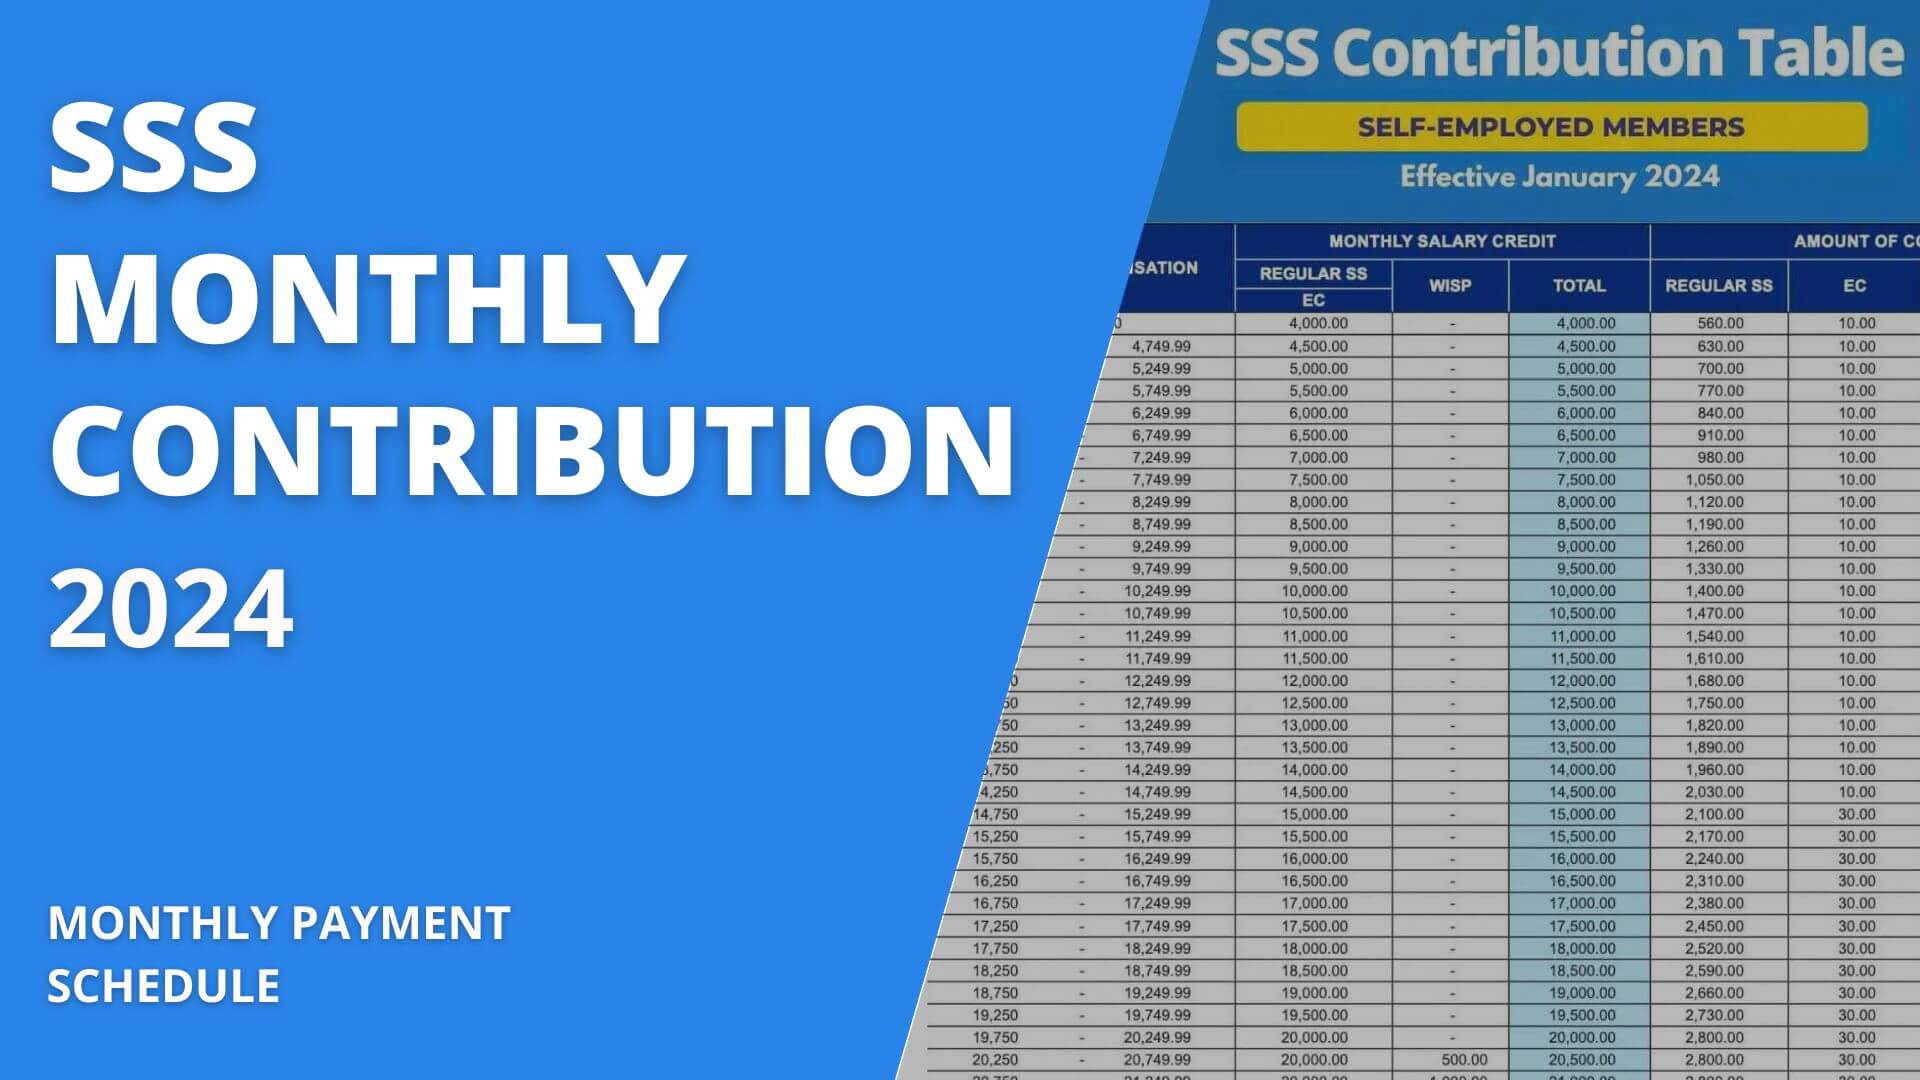 SSS MOUNTHLY CONTRIBUTION 2024